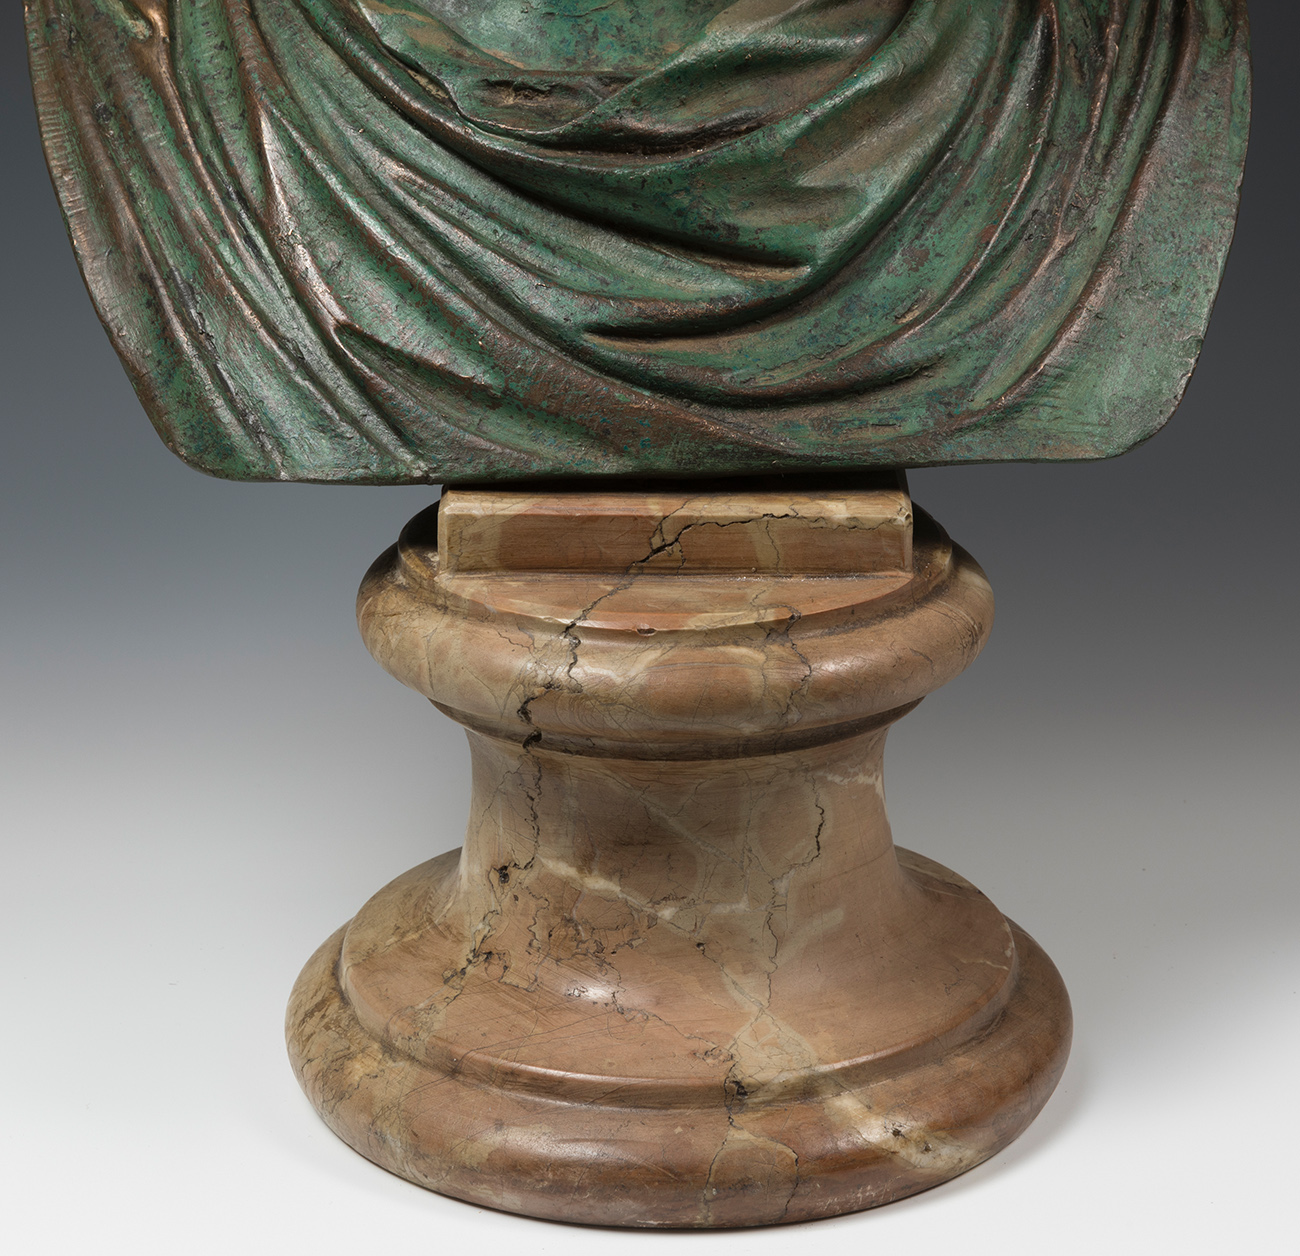 Female bust; Rome, 19th century.Bronze and marble.Measurements: 52 x 25 x 27 cm.Female bust that - Image 7 of 7